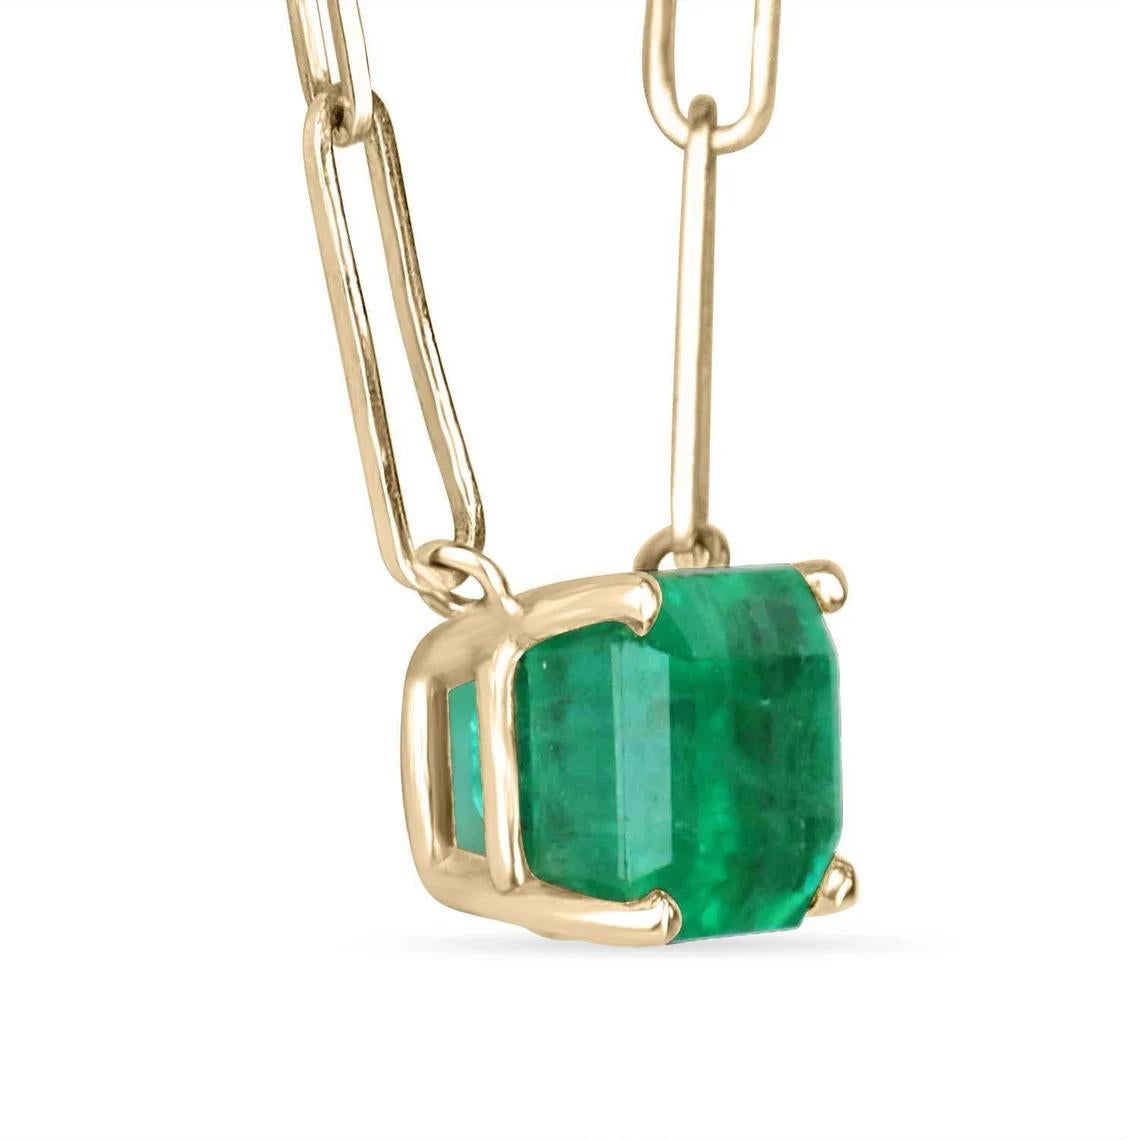 Featured here is a 3.25-carat stunning, East to West emerald necklace in 14K yellow gold. Displayed in the center is a dark green emerald with very good eye clarity, accented by a simple prong gold mount, allowing for the emerald to be shown in full